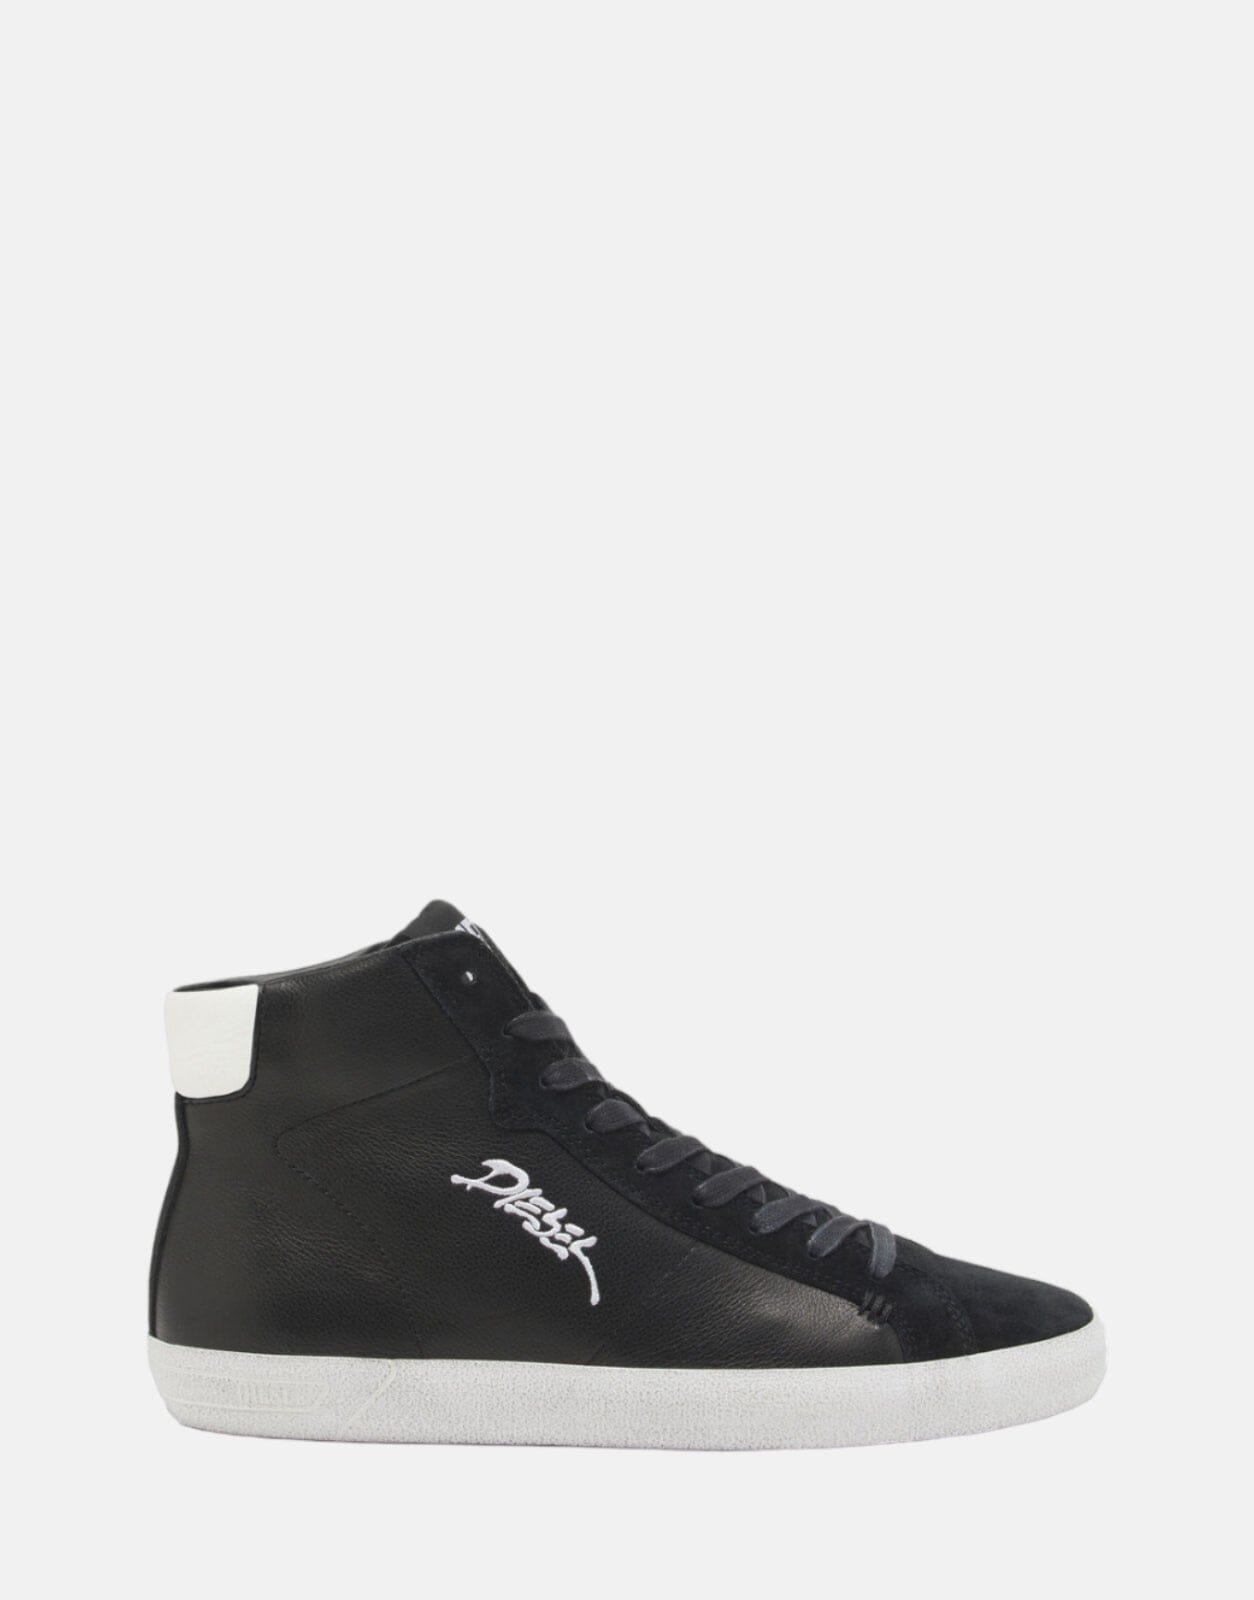 50% OFF on Nike Men Black Solid Leather Ebernon Mid-Top Sneakers on Myntra  | PaisaWapas.com